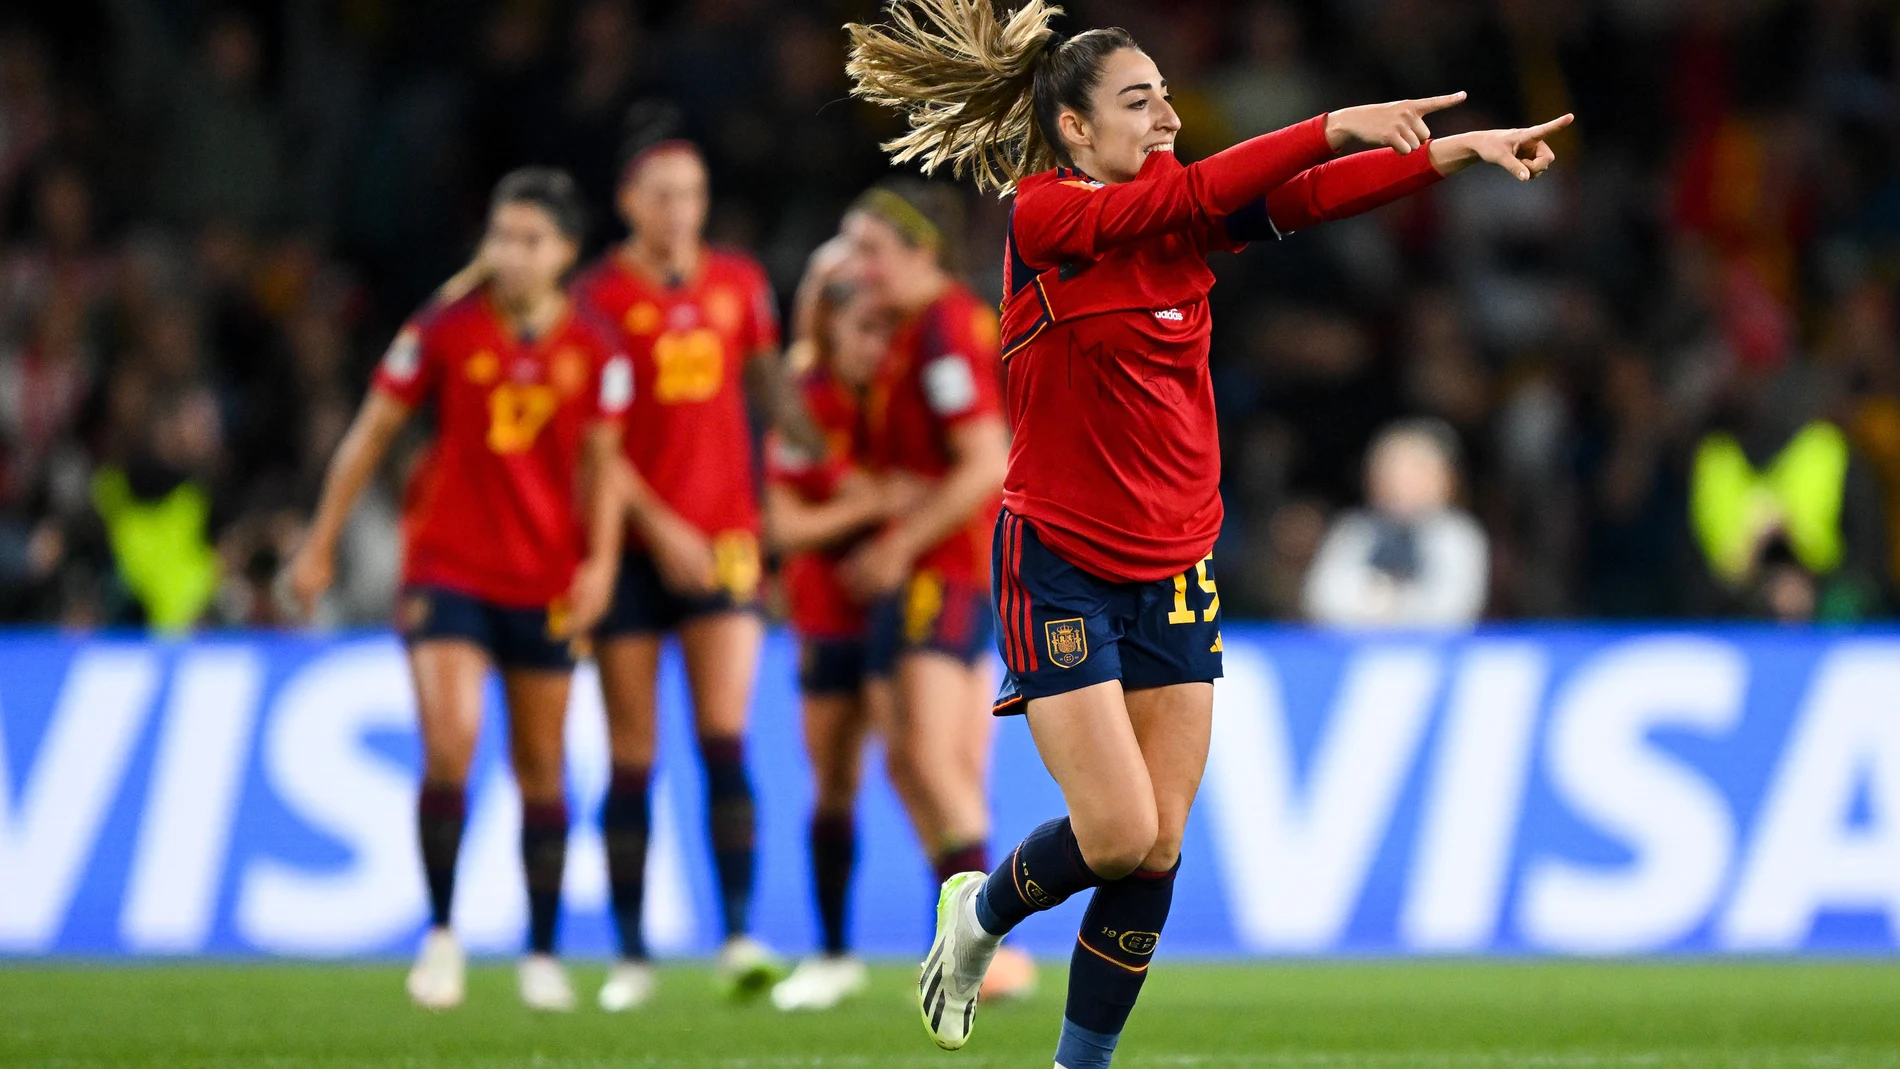 Sydney (Australia), 20/08/2023.- Olga Carmona of Spain celebrates after scoring a goal during the FIFA Women's World Cup 2023 Final soccer match between Spain and England at Stadium Australia in Sydney, Australia, 20 August 2023. (Mundial de Fútbol, España) EFE/EPA/DEAN LEWINS AUSTRALIA AND NEW ZEALAND OUT